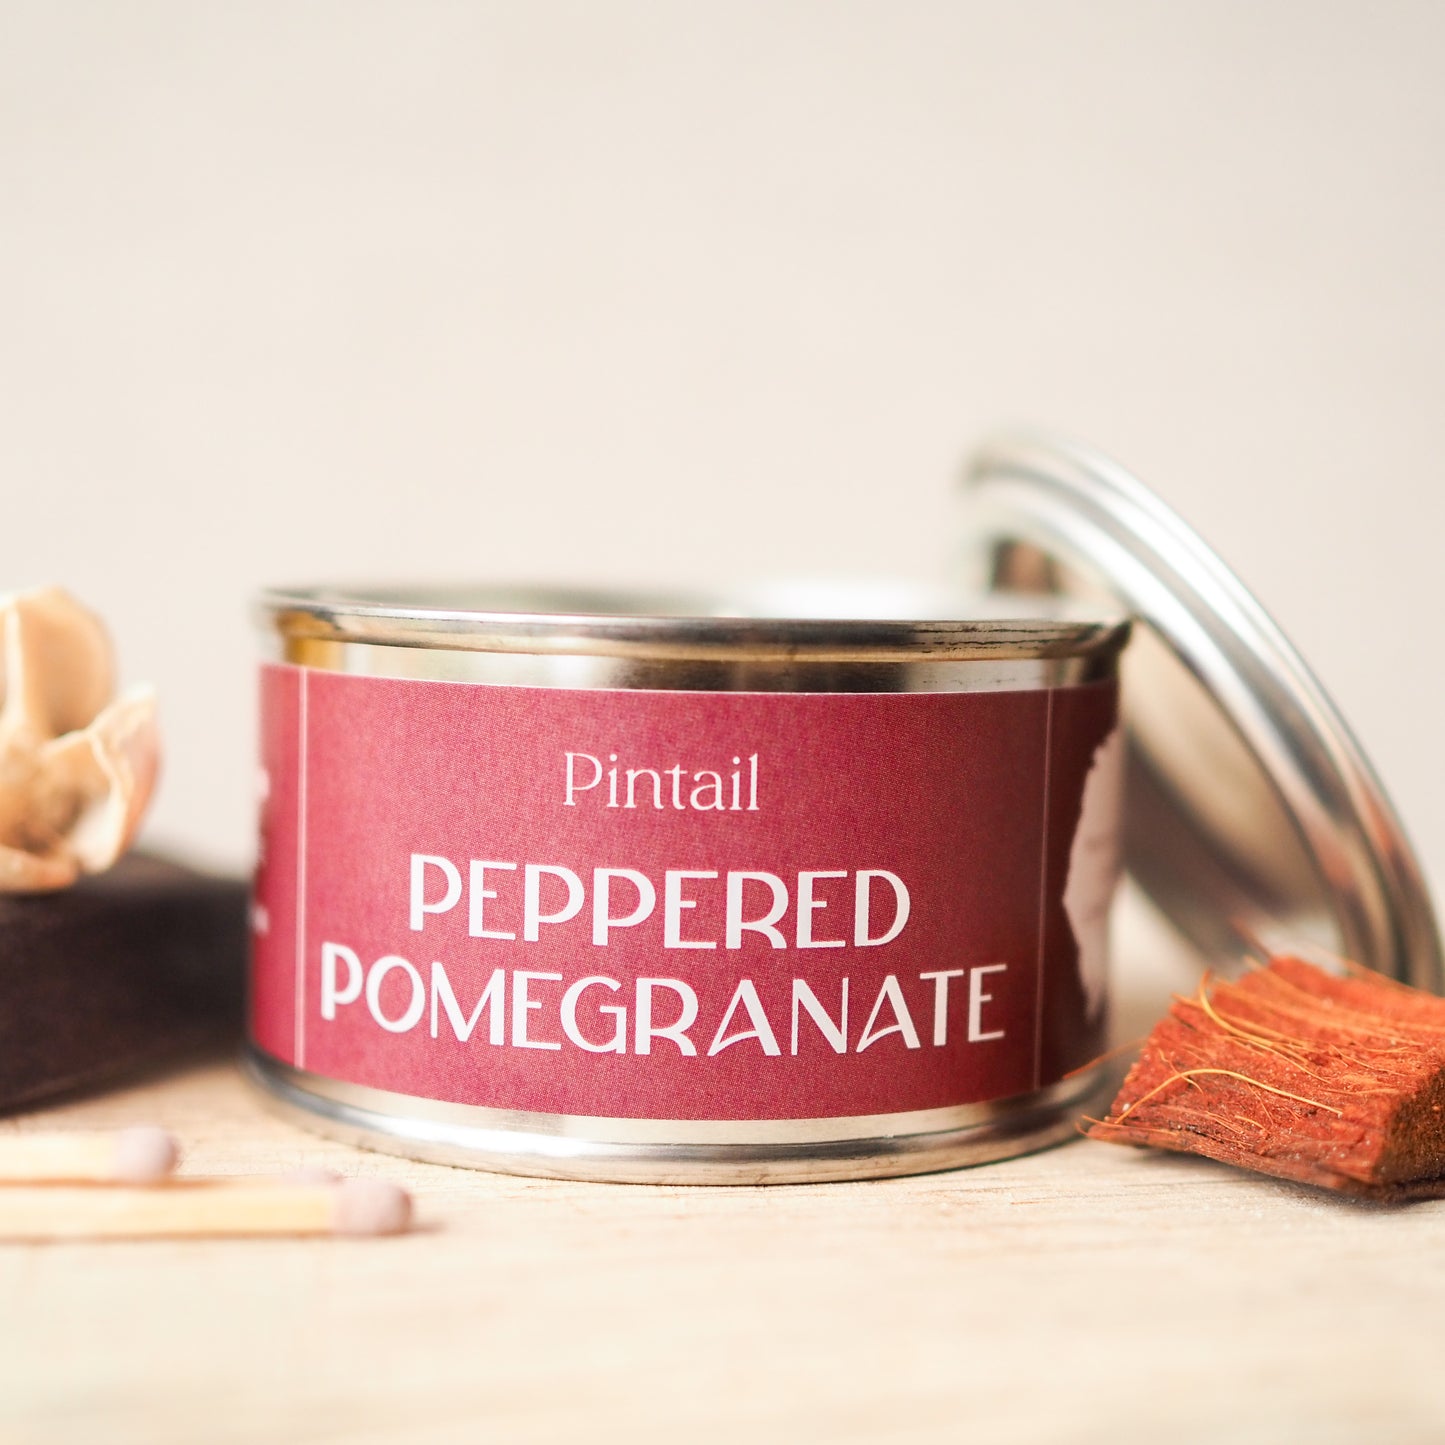 Peppered Pomegranate Paint Pot